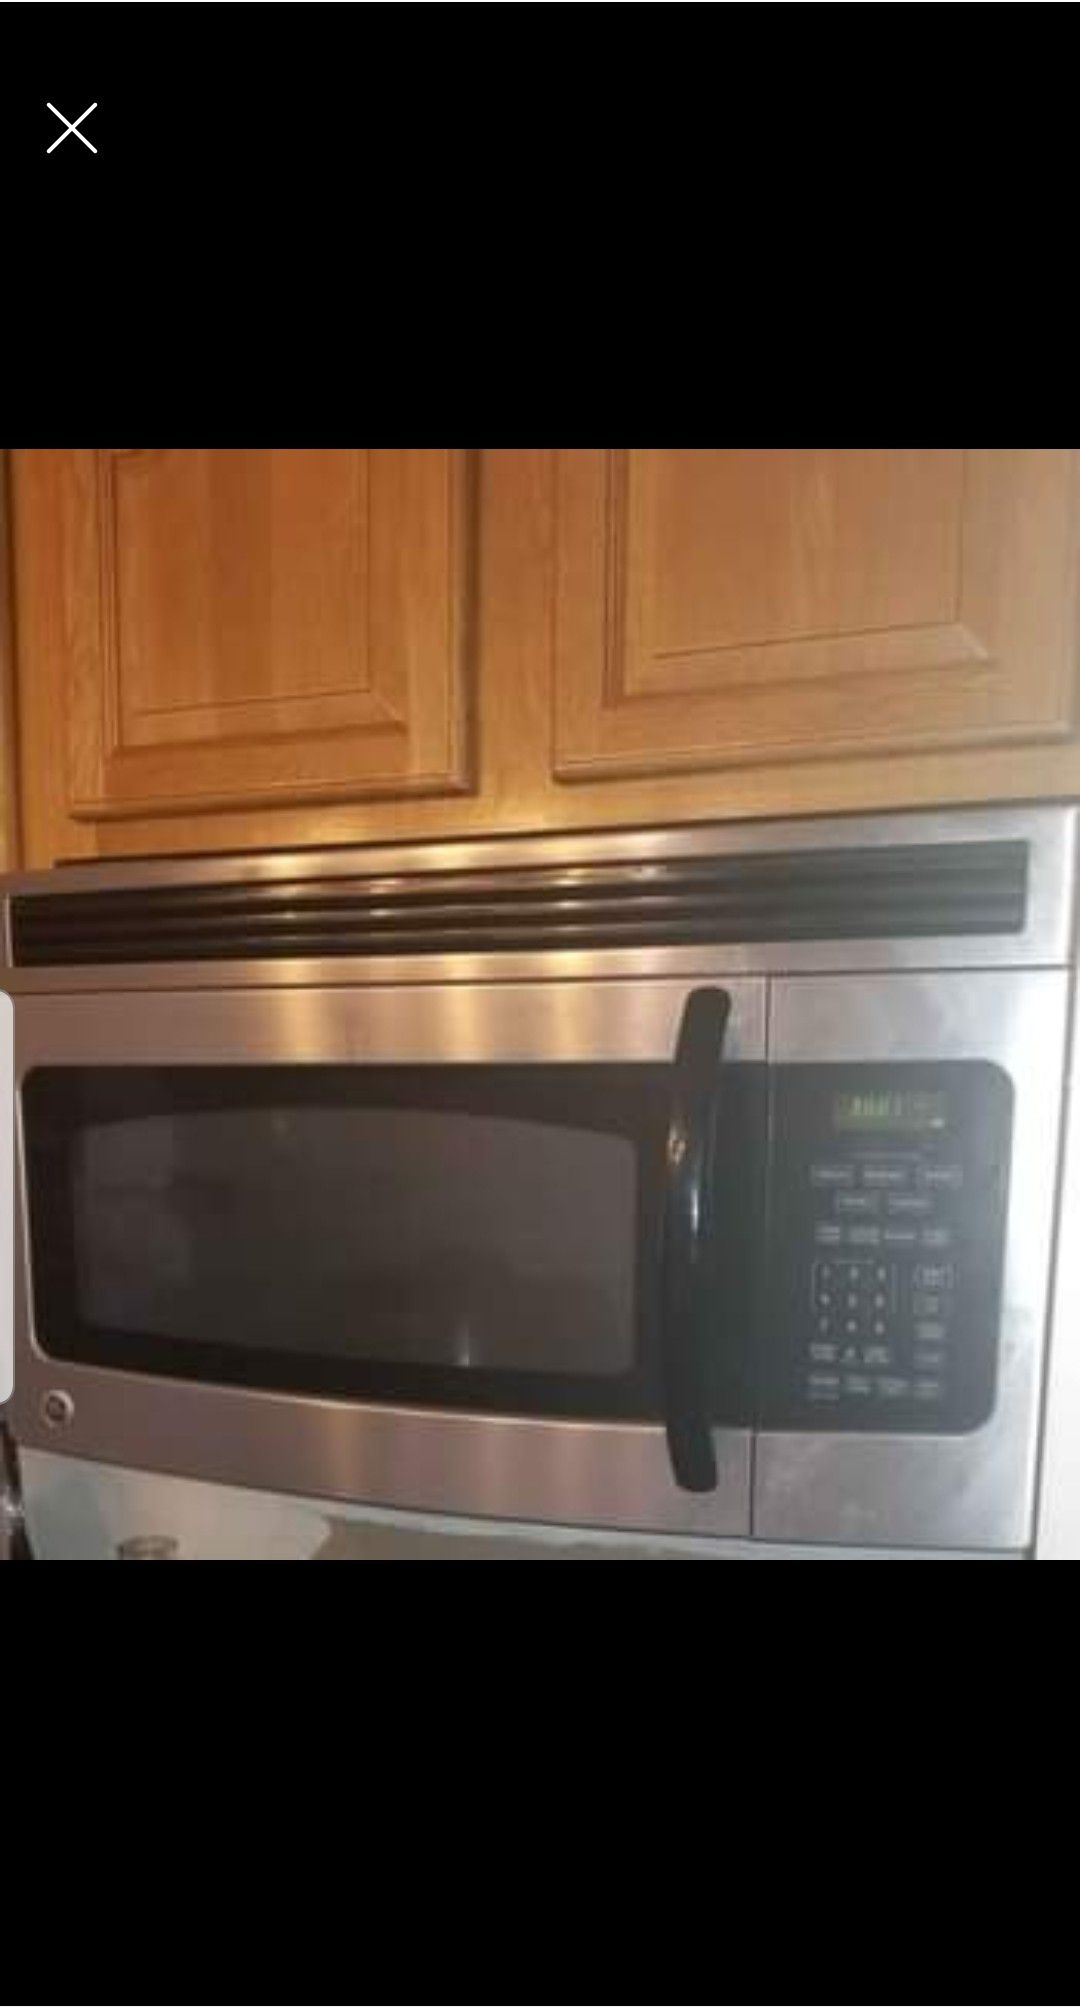 G.E. over the range microwave..with vent and lights underneath